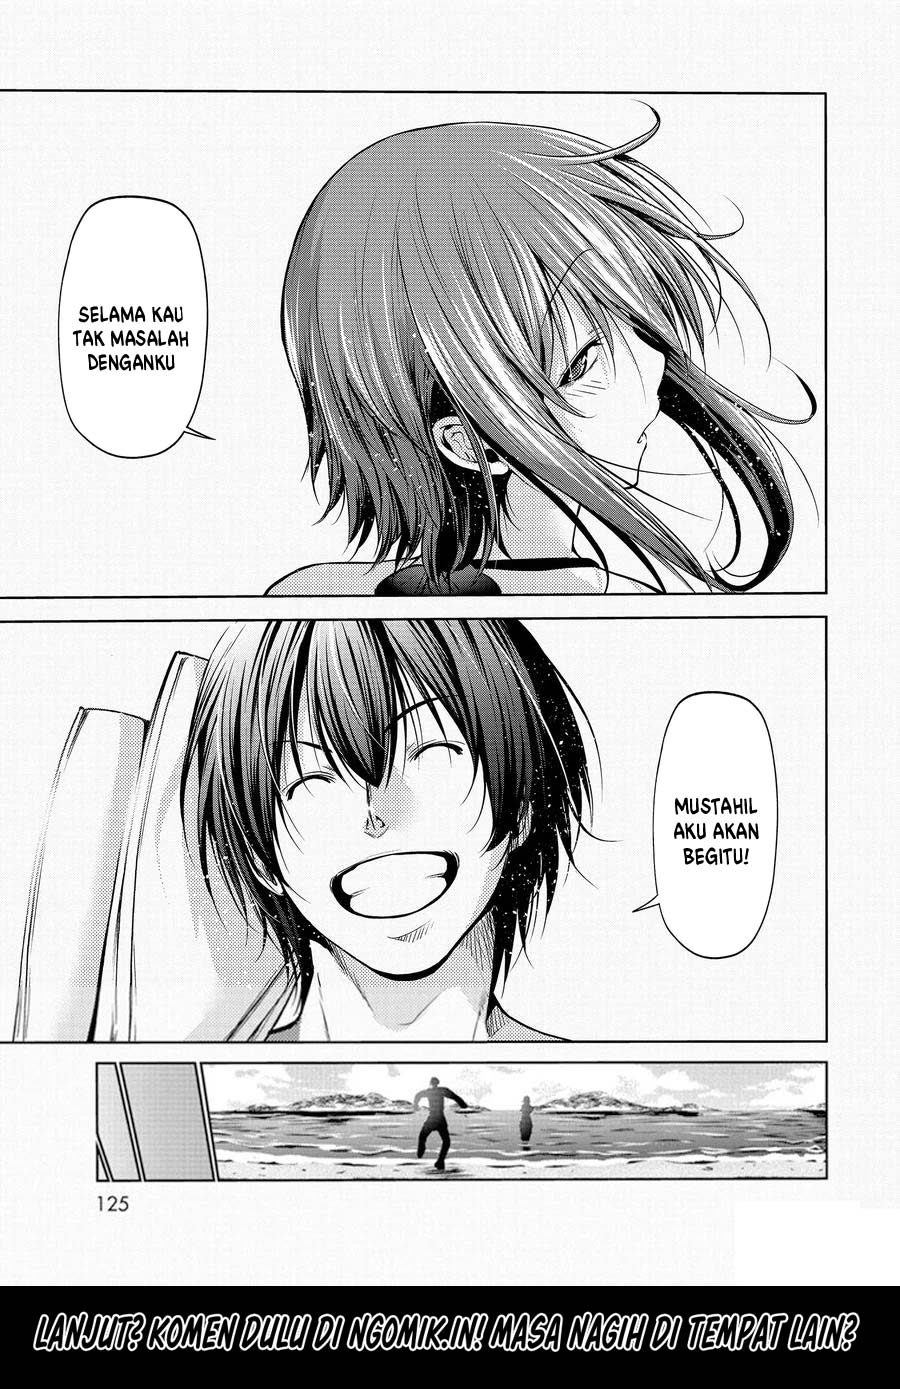 Grand Blue Chapter 63